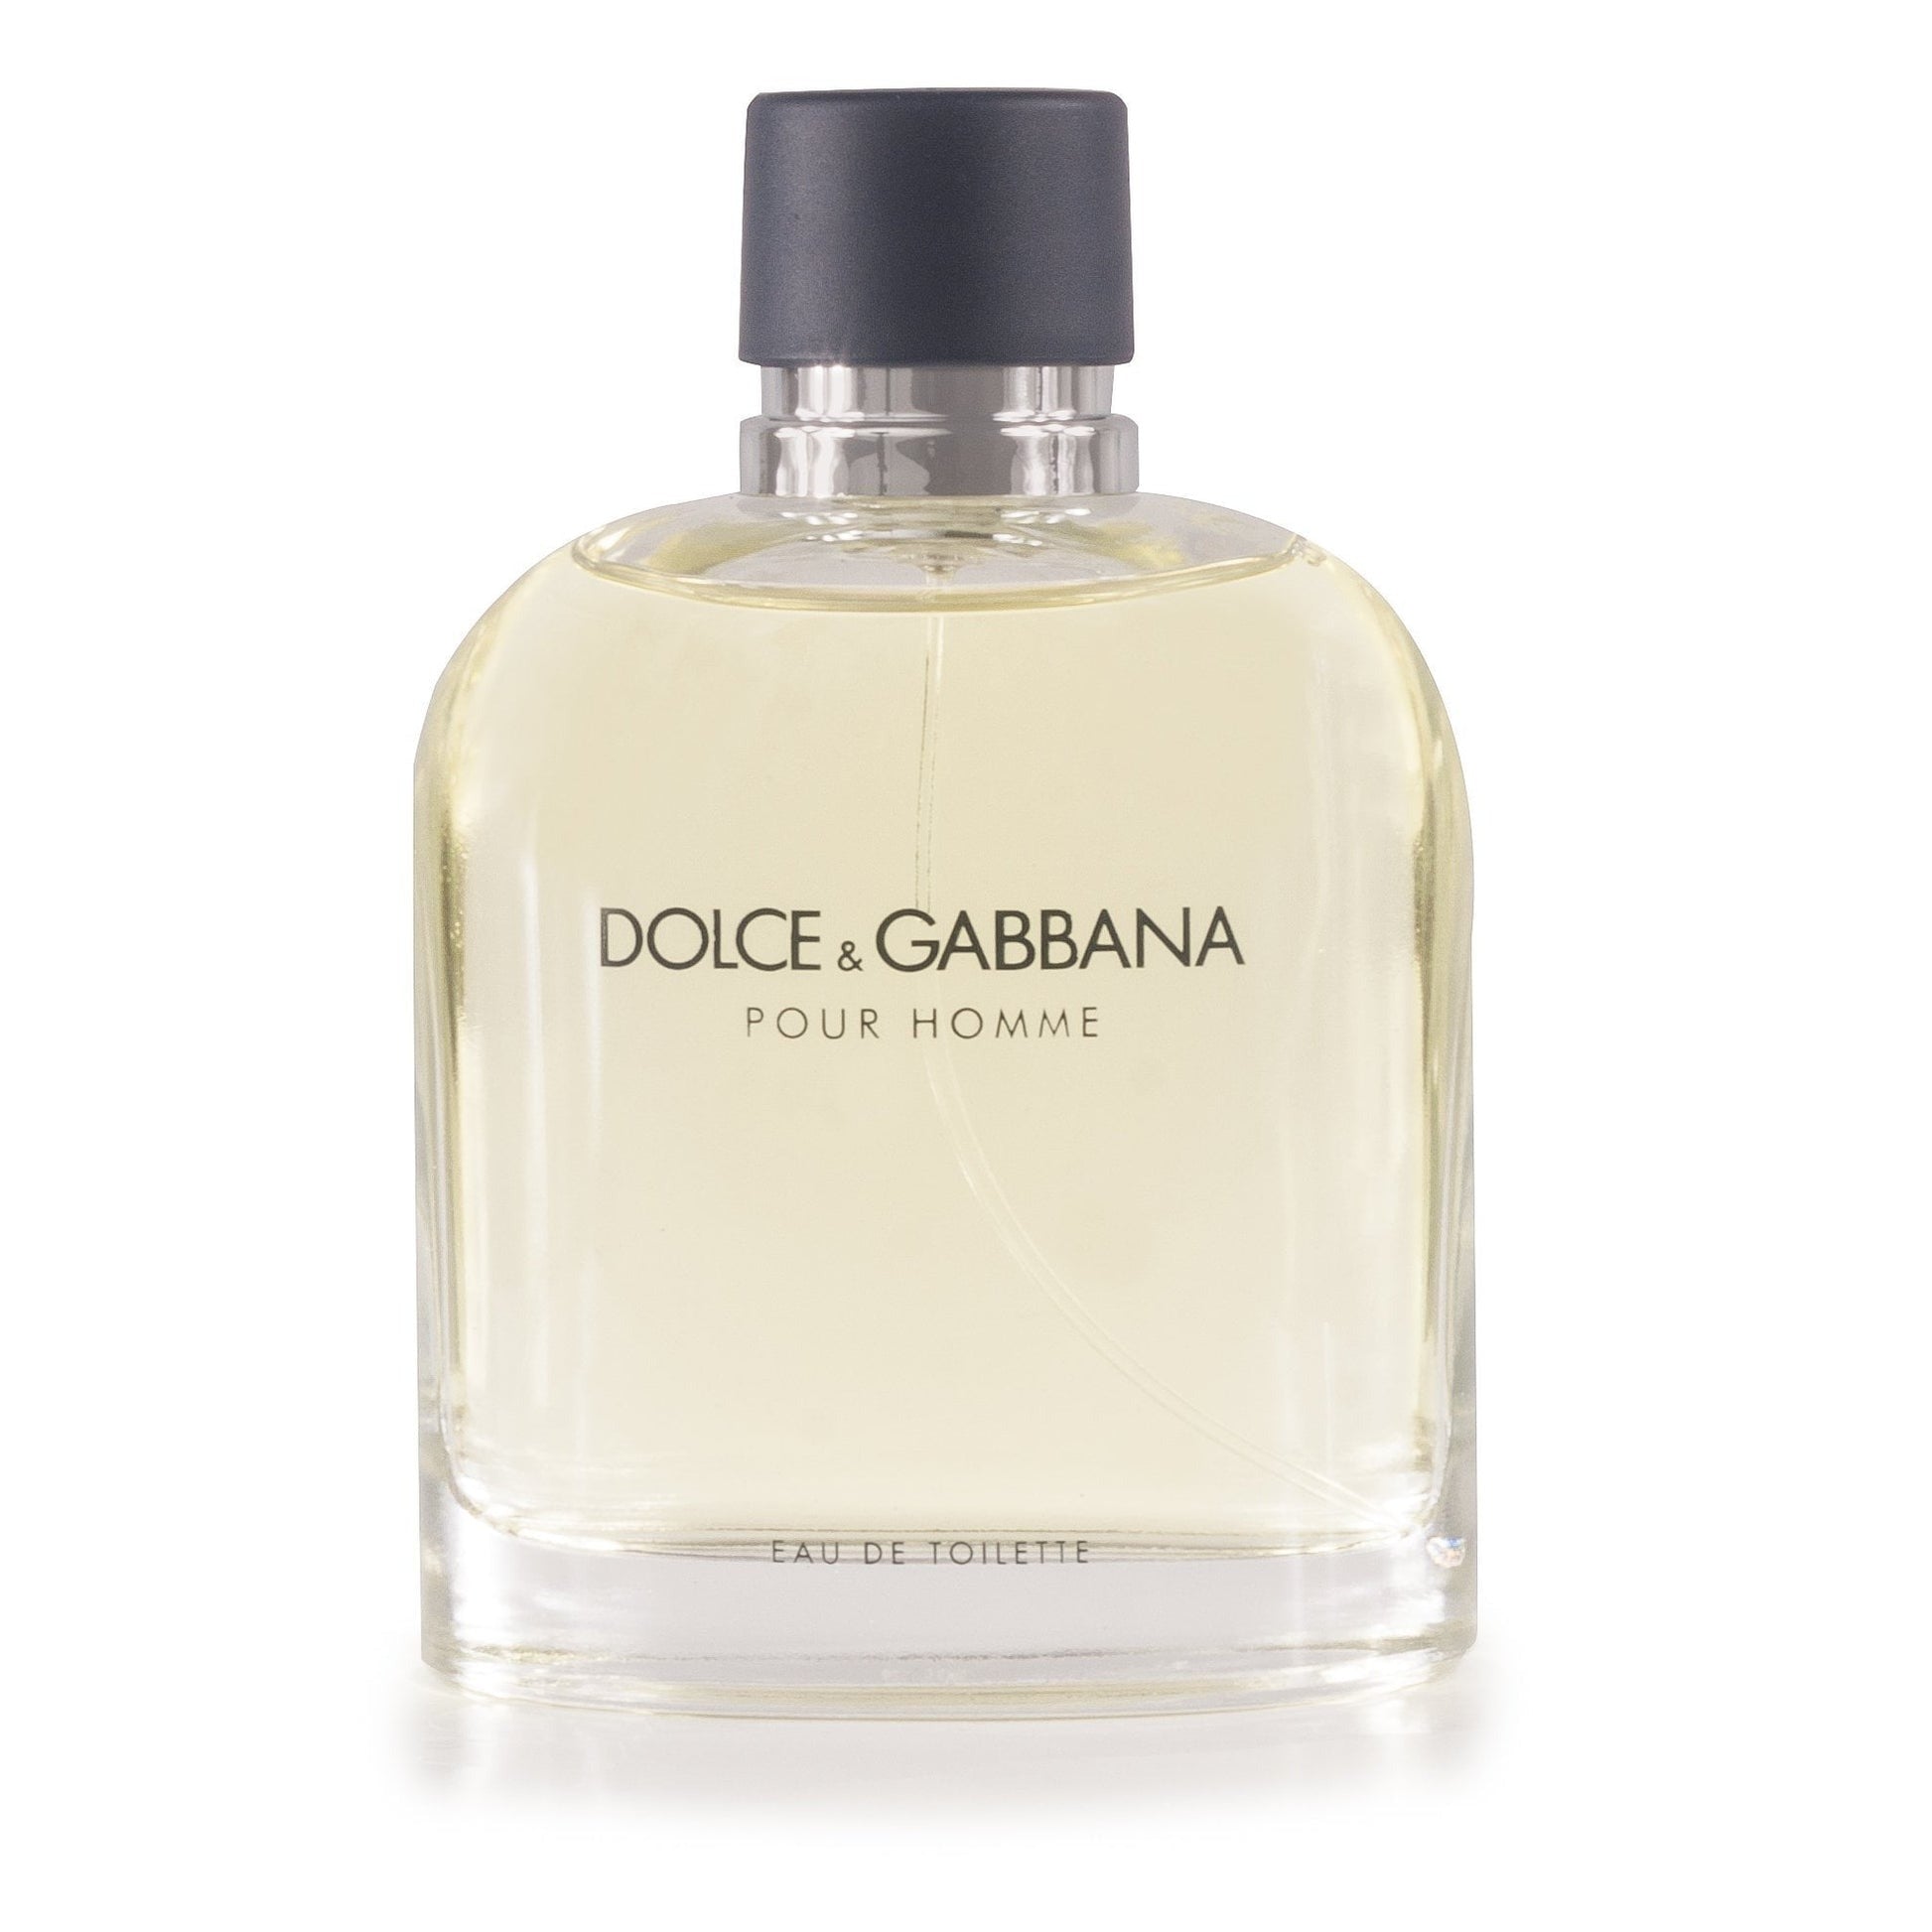 Dolce and Gabbana by Dolce and Gabbana for Men - 2.5 oz EDT Spray